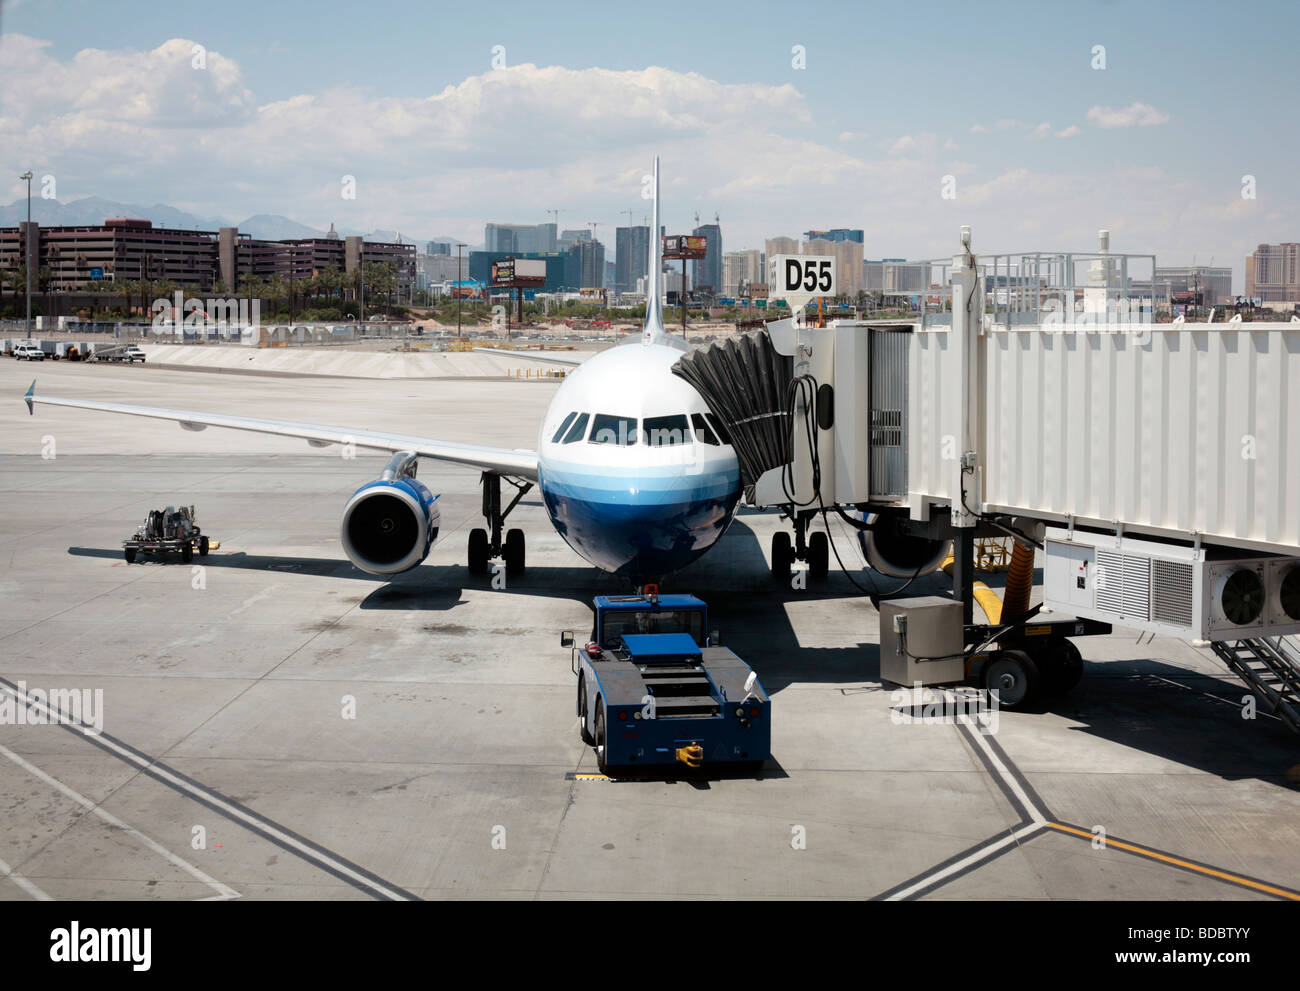 A United airlines plane at Las Vegas airport, USA. Stock Photo